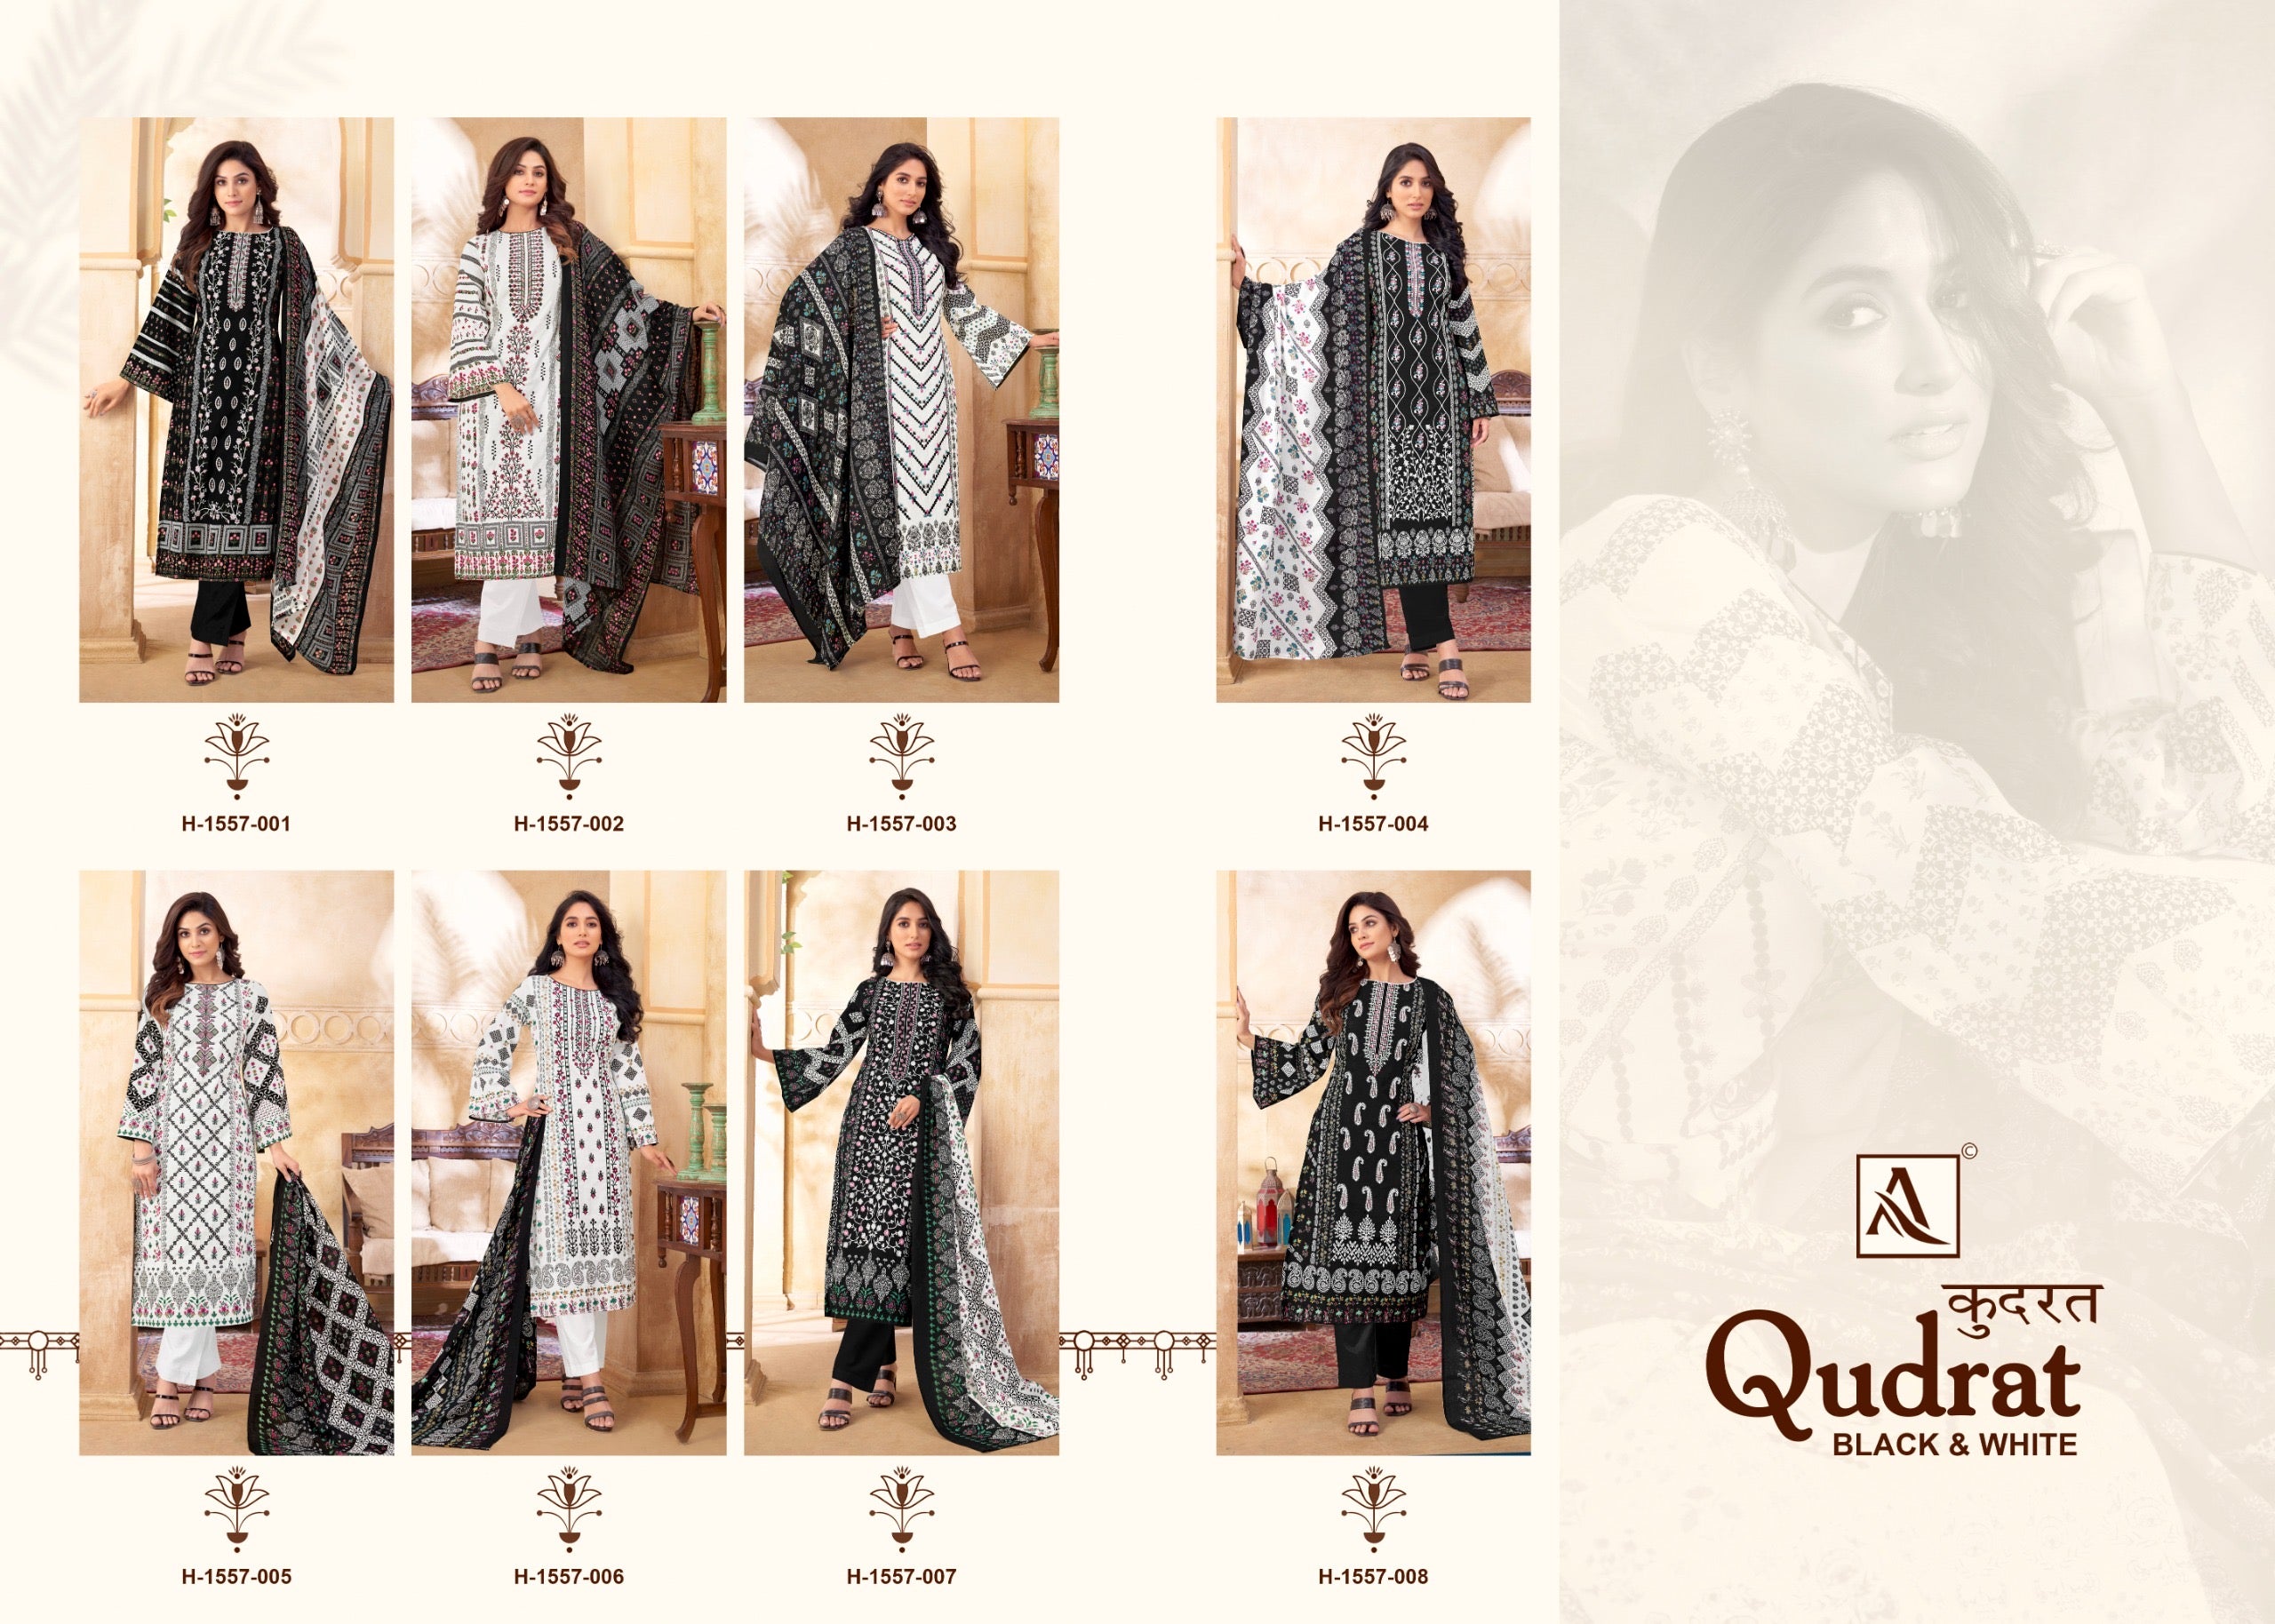 Alok Suits Qudrat Black & White Cotton With Embroidery Work Salwar Suits At Wholesale Rate